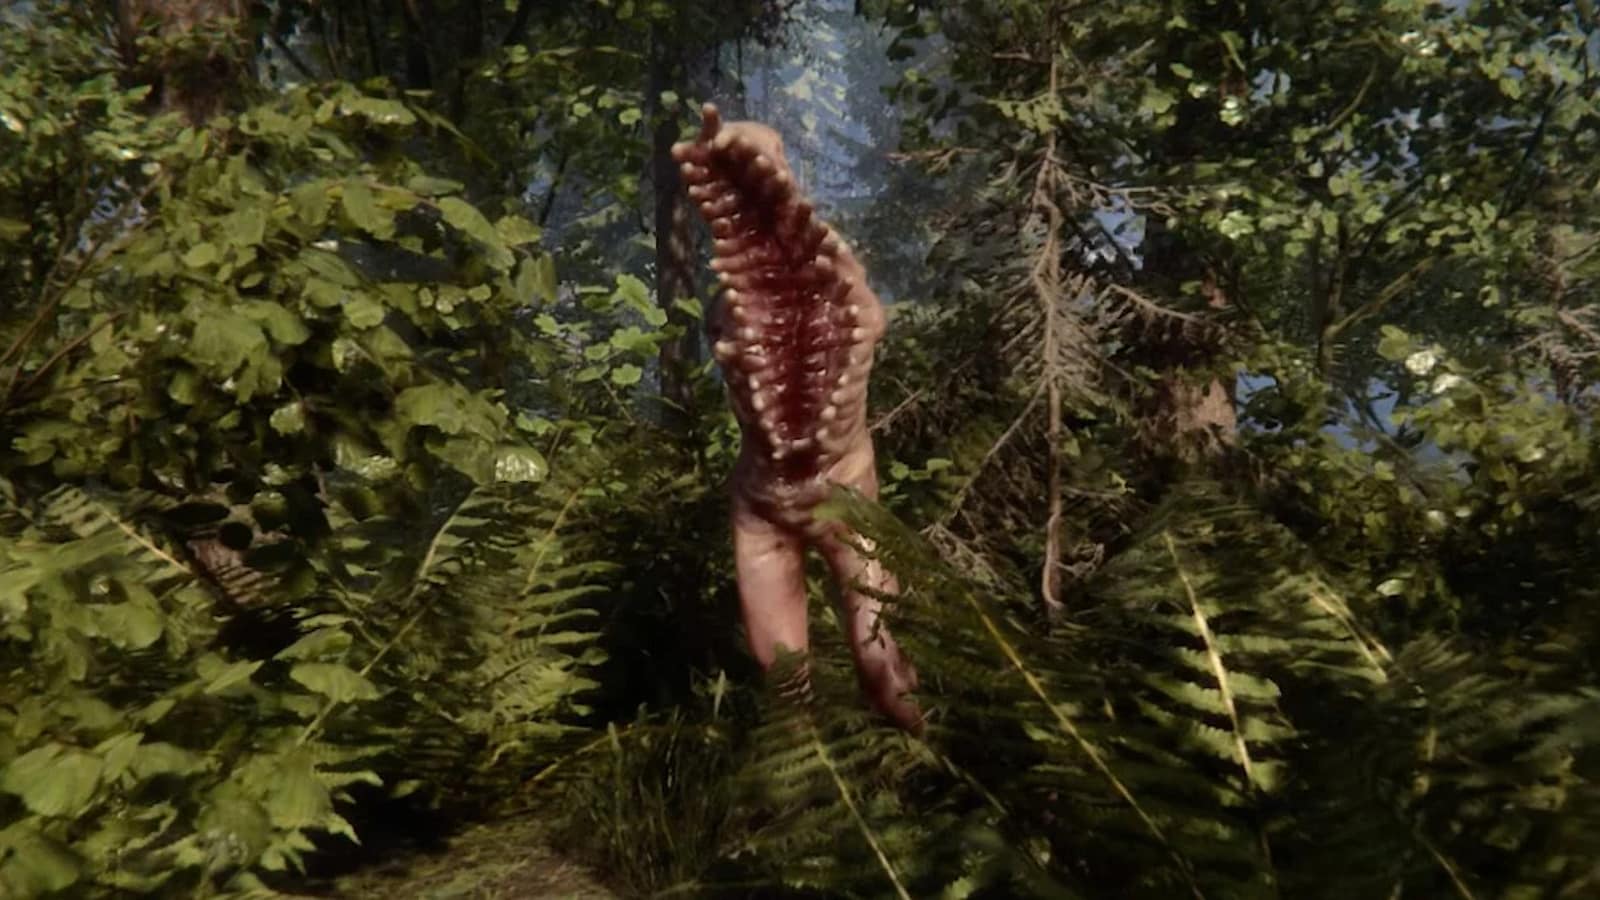 Sons of the Forest released its second trailer and confirmed the